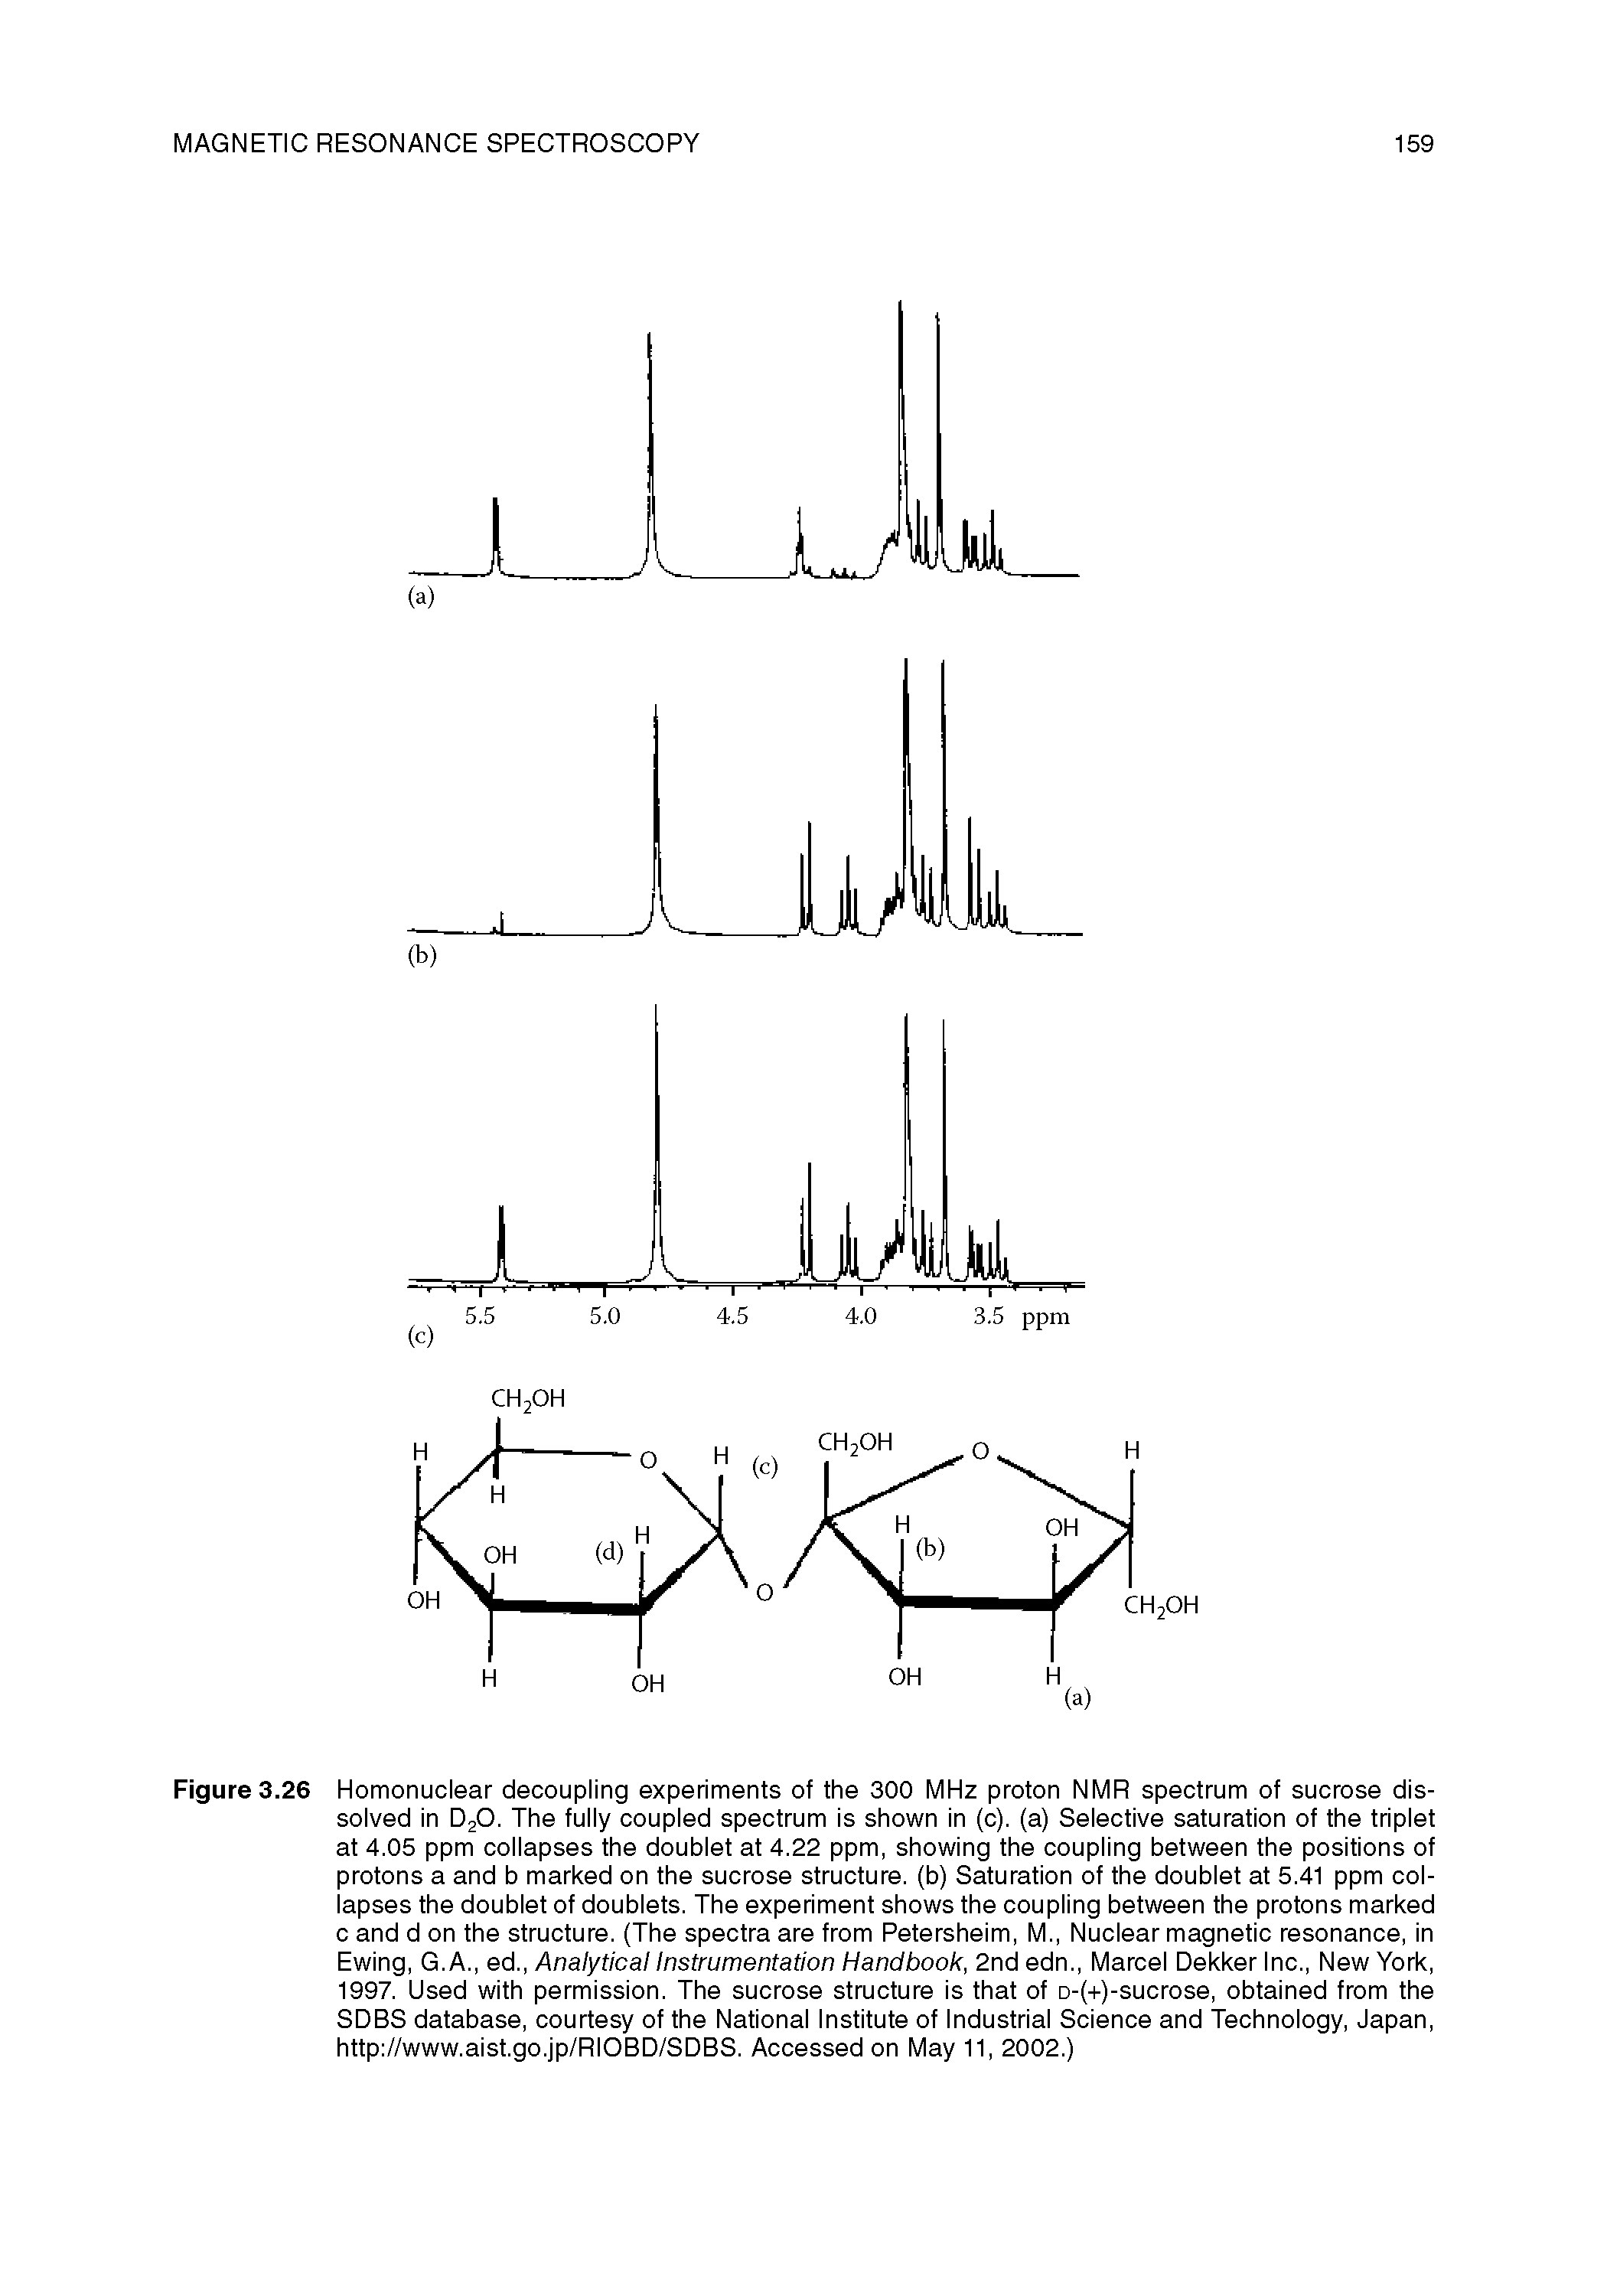 Figure 3.26 Homonuclear decoupling experiments of the 300 MHz proton NMR spectrum of sucrose dissolved in DjO. The fully coupled spectrum is shown in (c). (a) Selective saturation of the triplet at 4.05 ppm collapses the doublet at 4.22 ppm, showing the coupling between the positions of protons a and b marked on the sucrose structure, (b) Saturation of the doublet at 5.41 ppm collapses the doublet of doublets. The experiment shows the coupling between the protons marked c and d on the structure. (The spectra are from Petersheim, M., Nuclear magnetic resonance, in Ewing, G.A., ed.. Analytical Instrumentation Handbook, 2nd edn., Marcel Dekker Inc., New York, 1997. Used with permission. The sucrose structure is that of D-(-r)-sucrose, obtained from the SDBS database, courtesy of the National Institute of Industrial Science and Technology, Japan, http //www.aist.go.jp/RICBD/SDBS. Accessed on May 11, 2002.)...